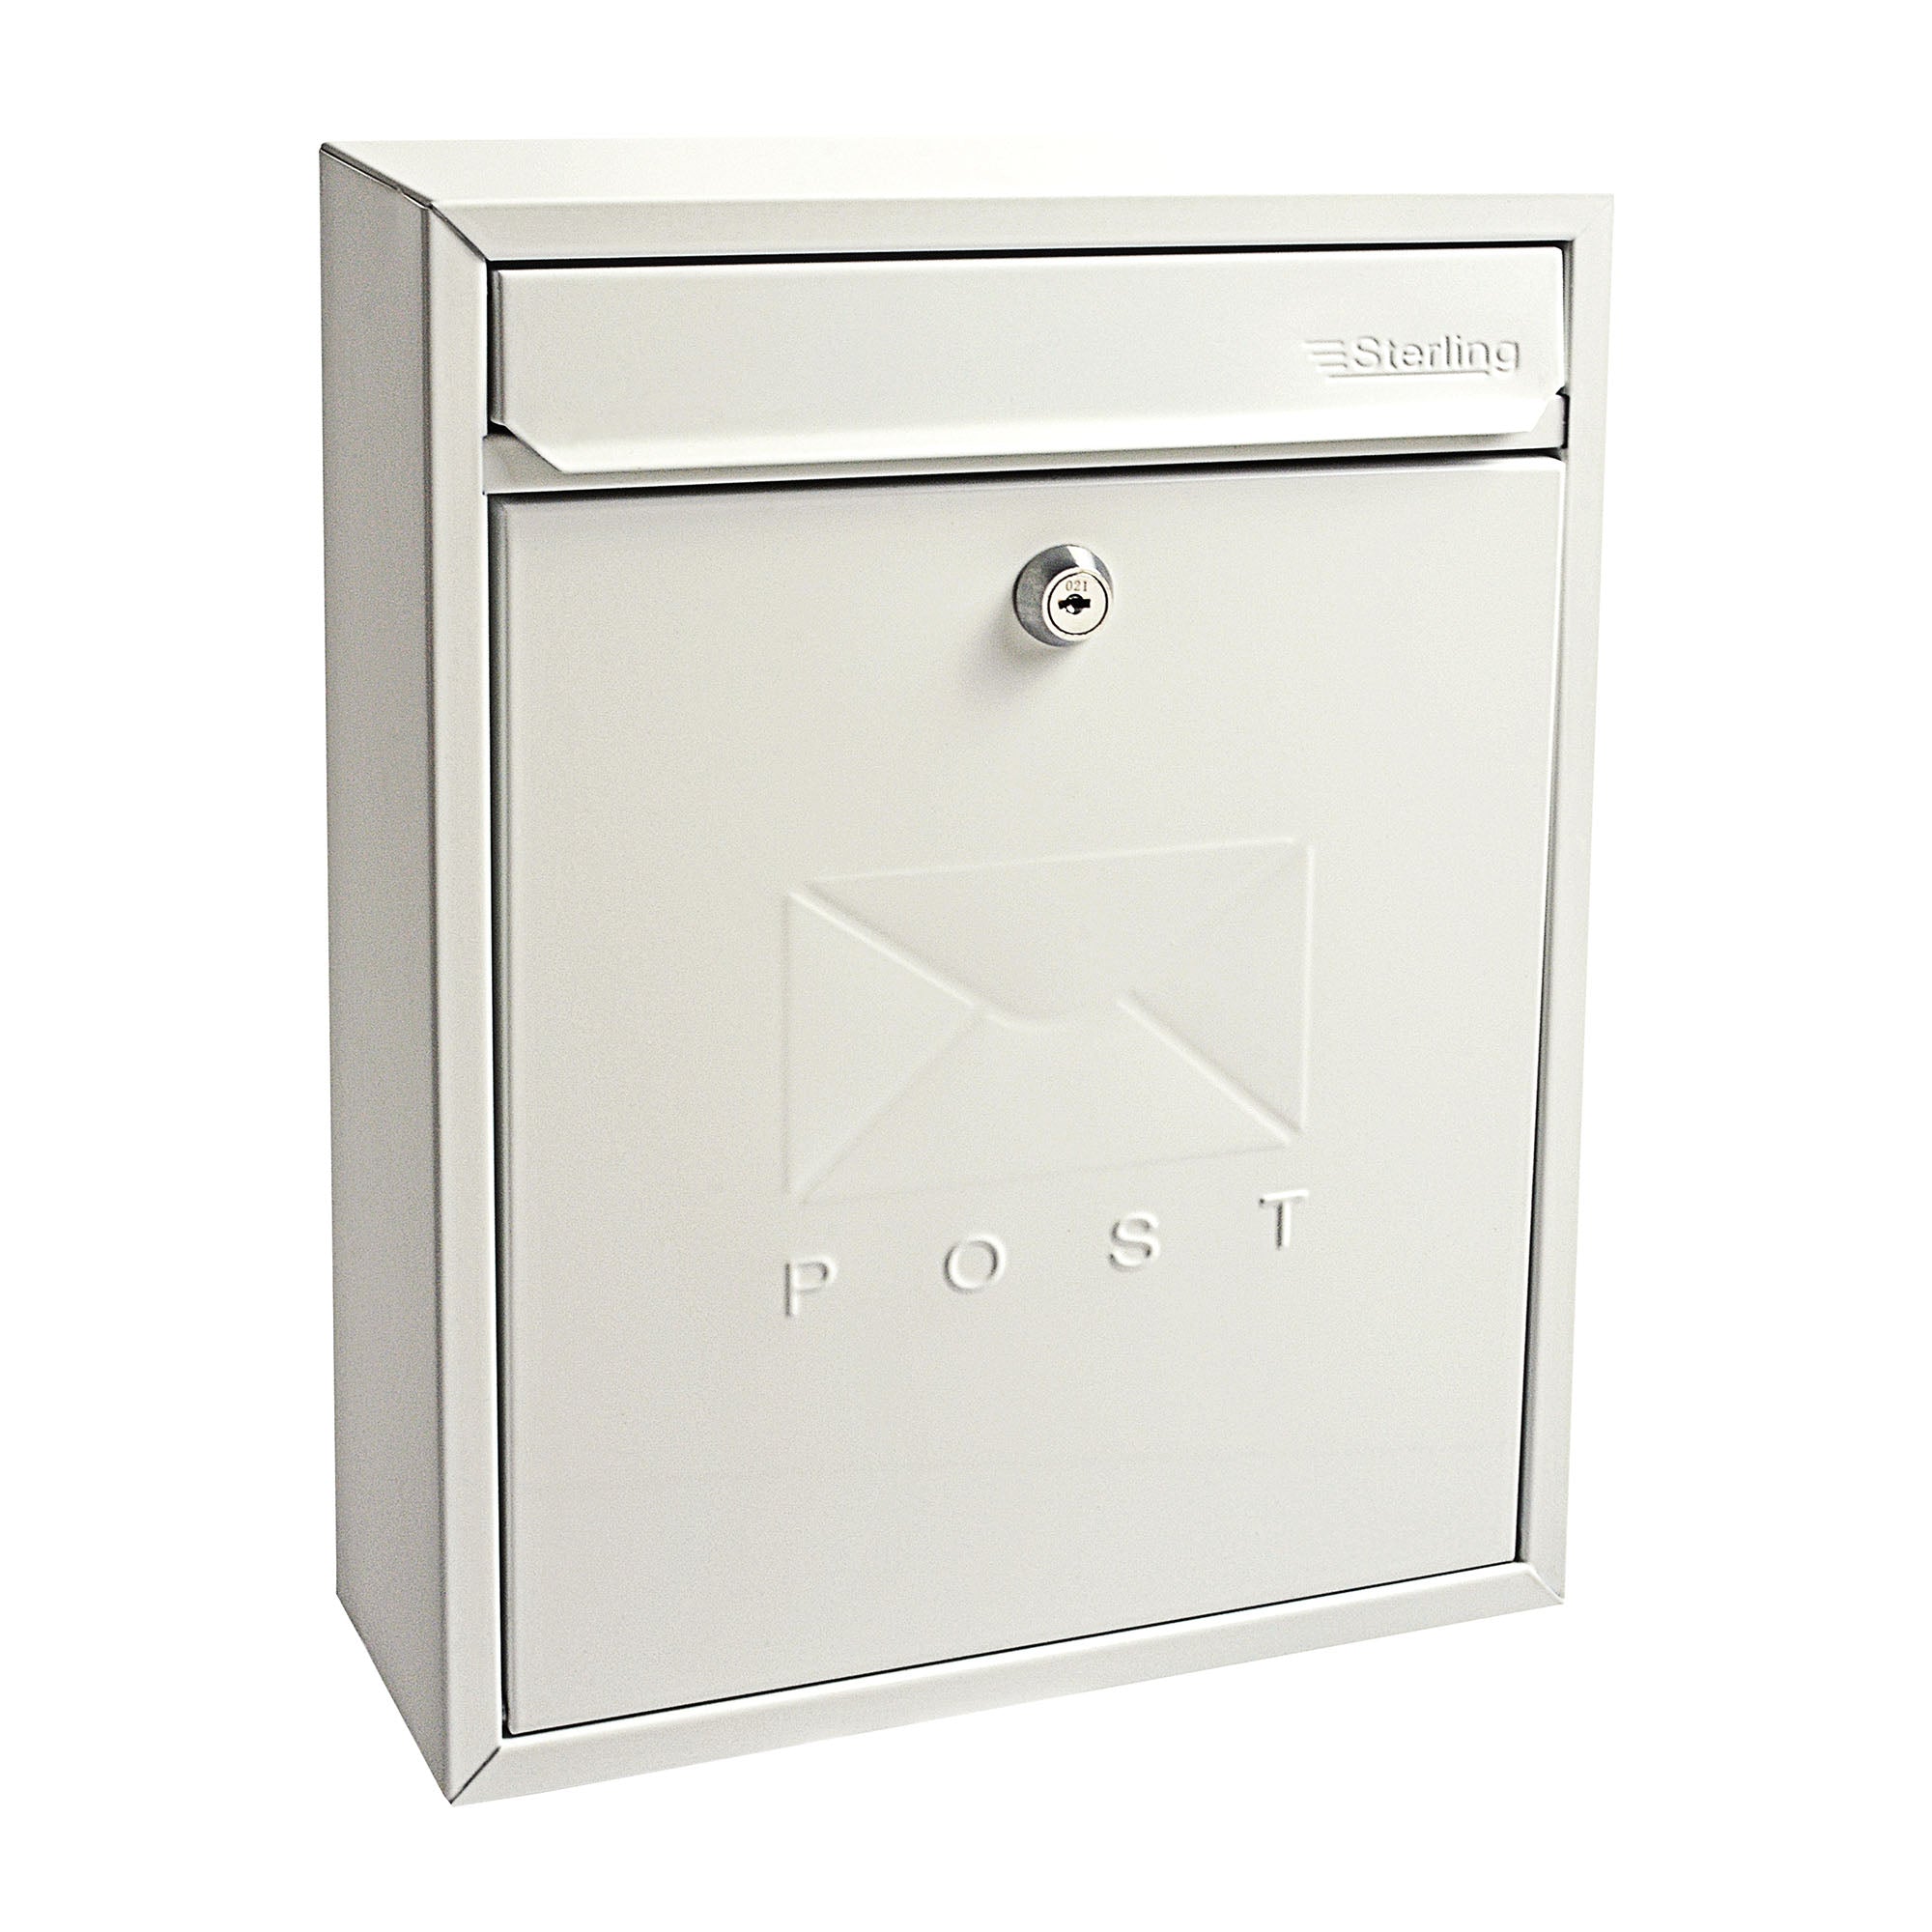 Burg-Wächter MB05 Compact Wall Mounted Galvanised Steel Post Box, White